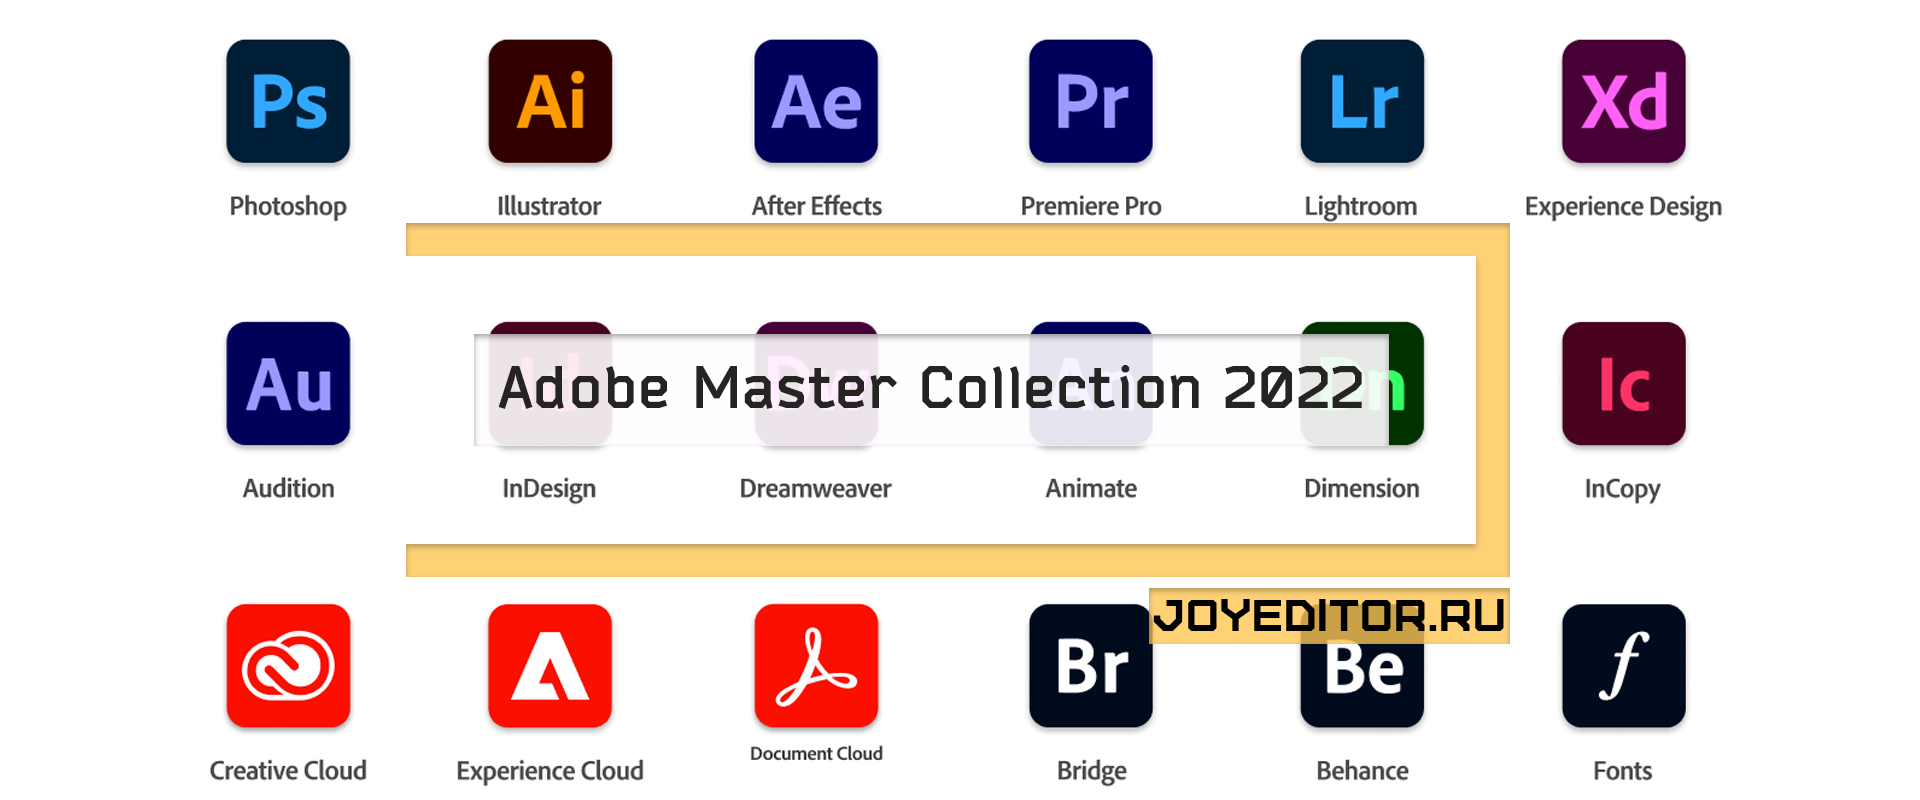 Adobe Master collection 2022. Адоб мастер коллекшн 2022. Adobe Master collection cc 2020. Adobe Master collection 2022 иконка.